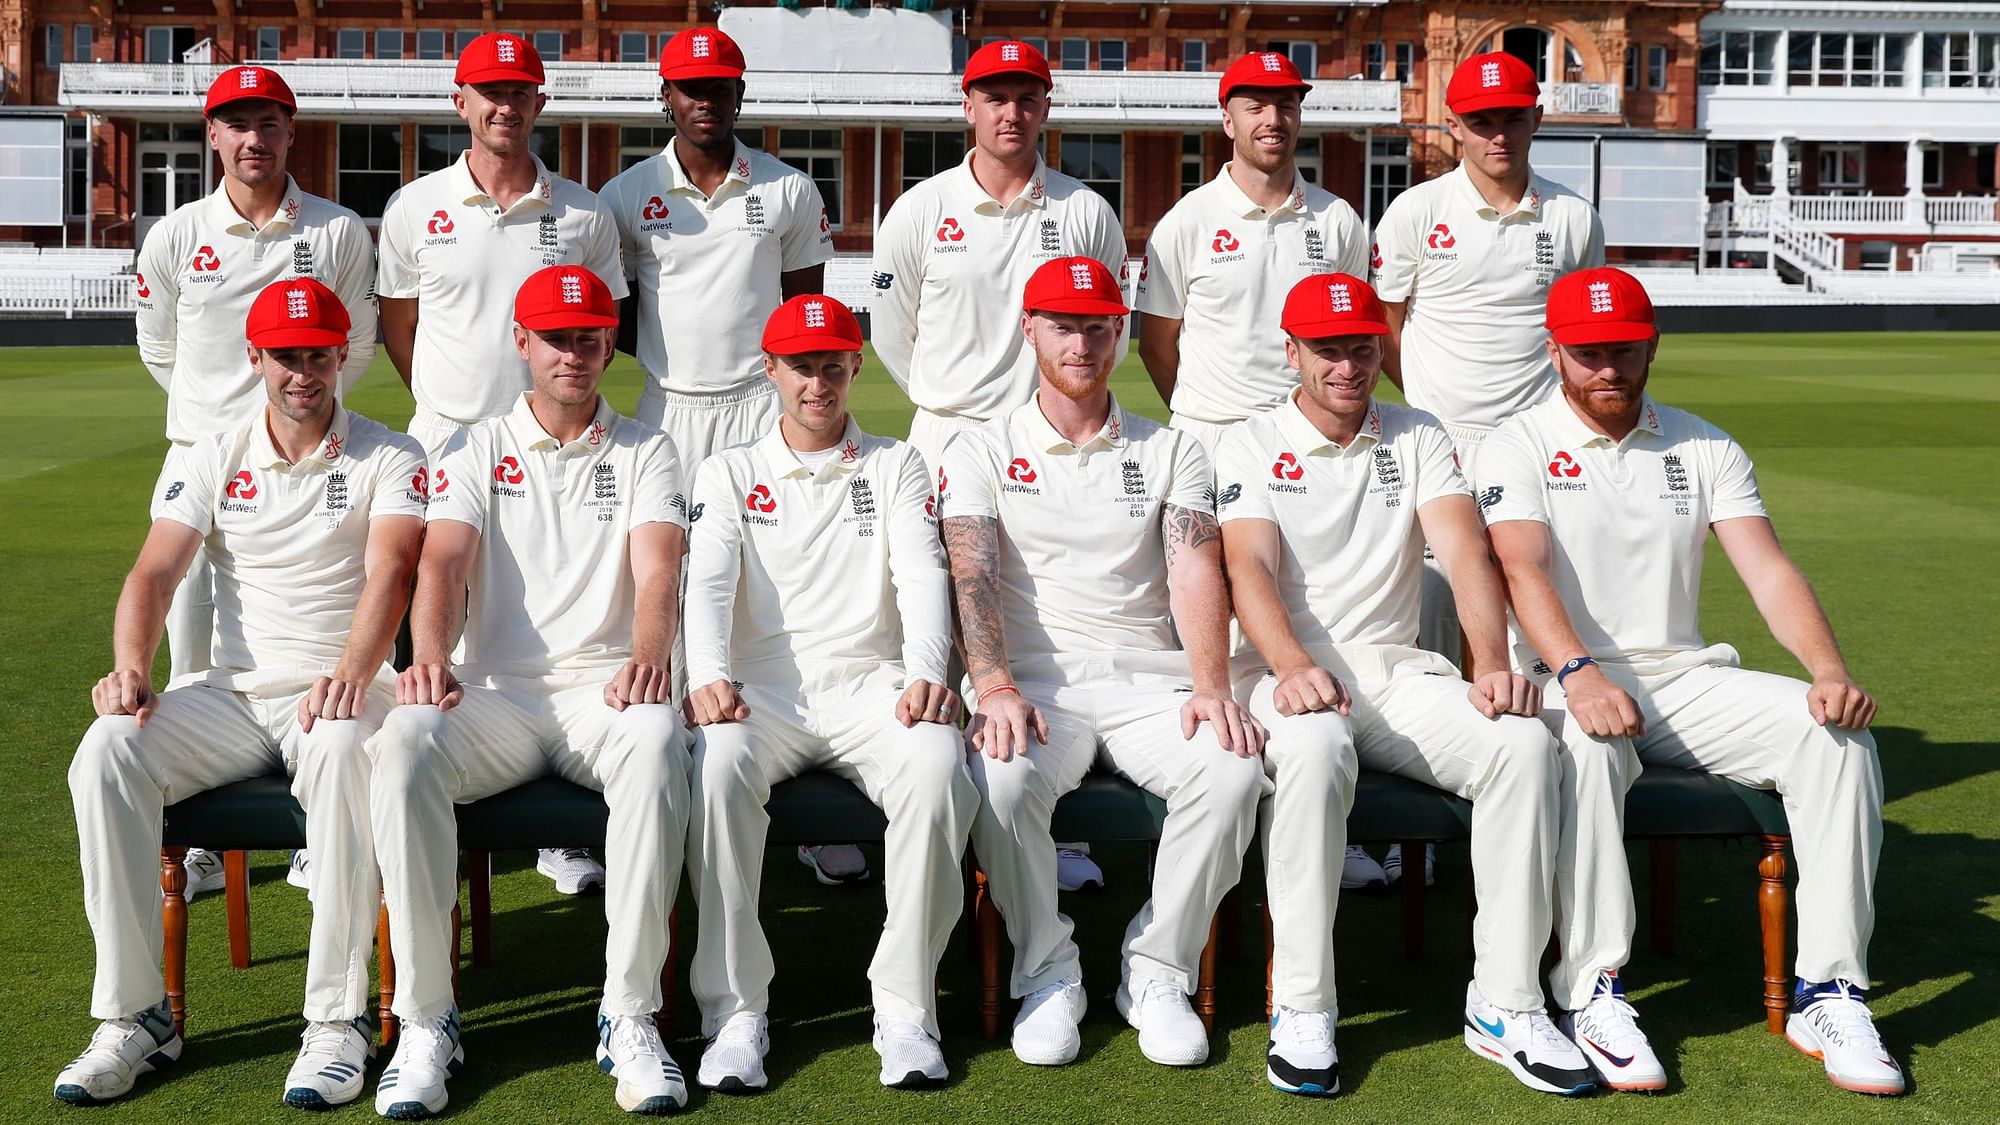 England cricket team pose for a team photo in front of the Lord’s pavilion wearing red caps which will be worn on day two of the second Test.